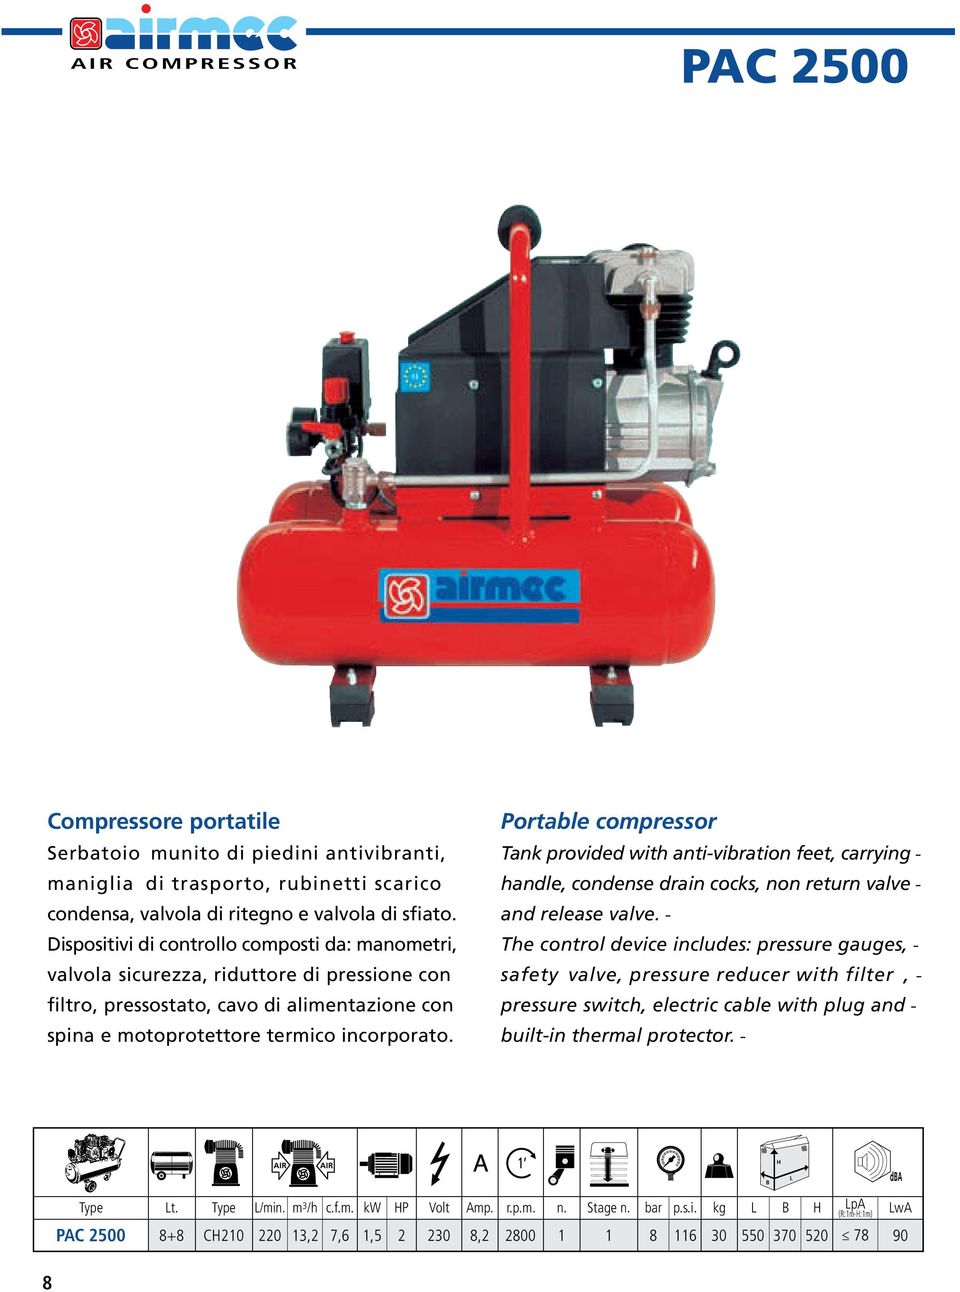 Portable compressor Tank provided with anti-vibration feet, carryinghandle, condense drain cocks, non return valveand release valve.